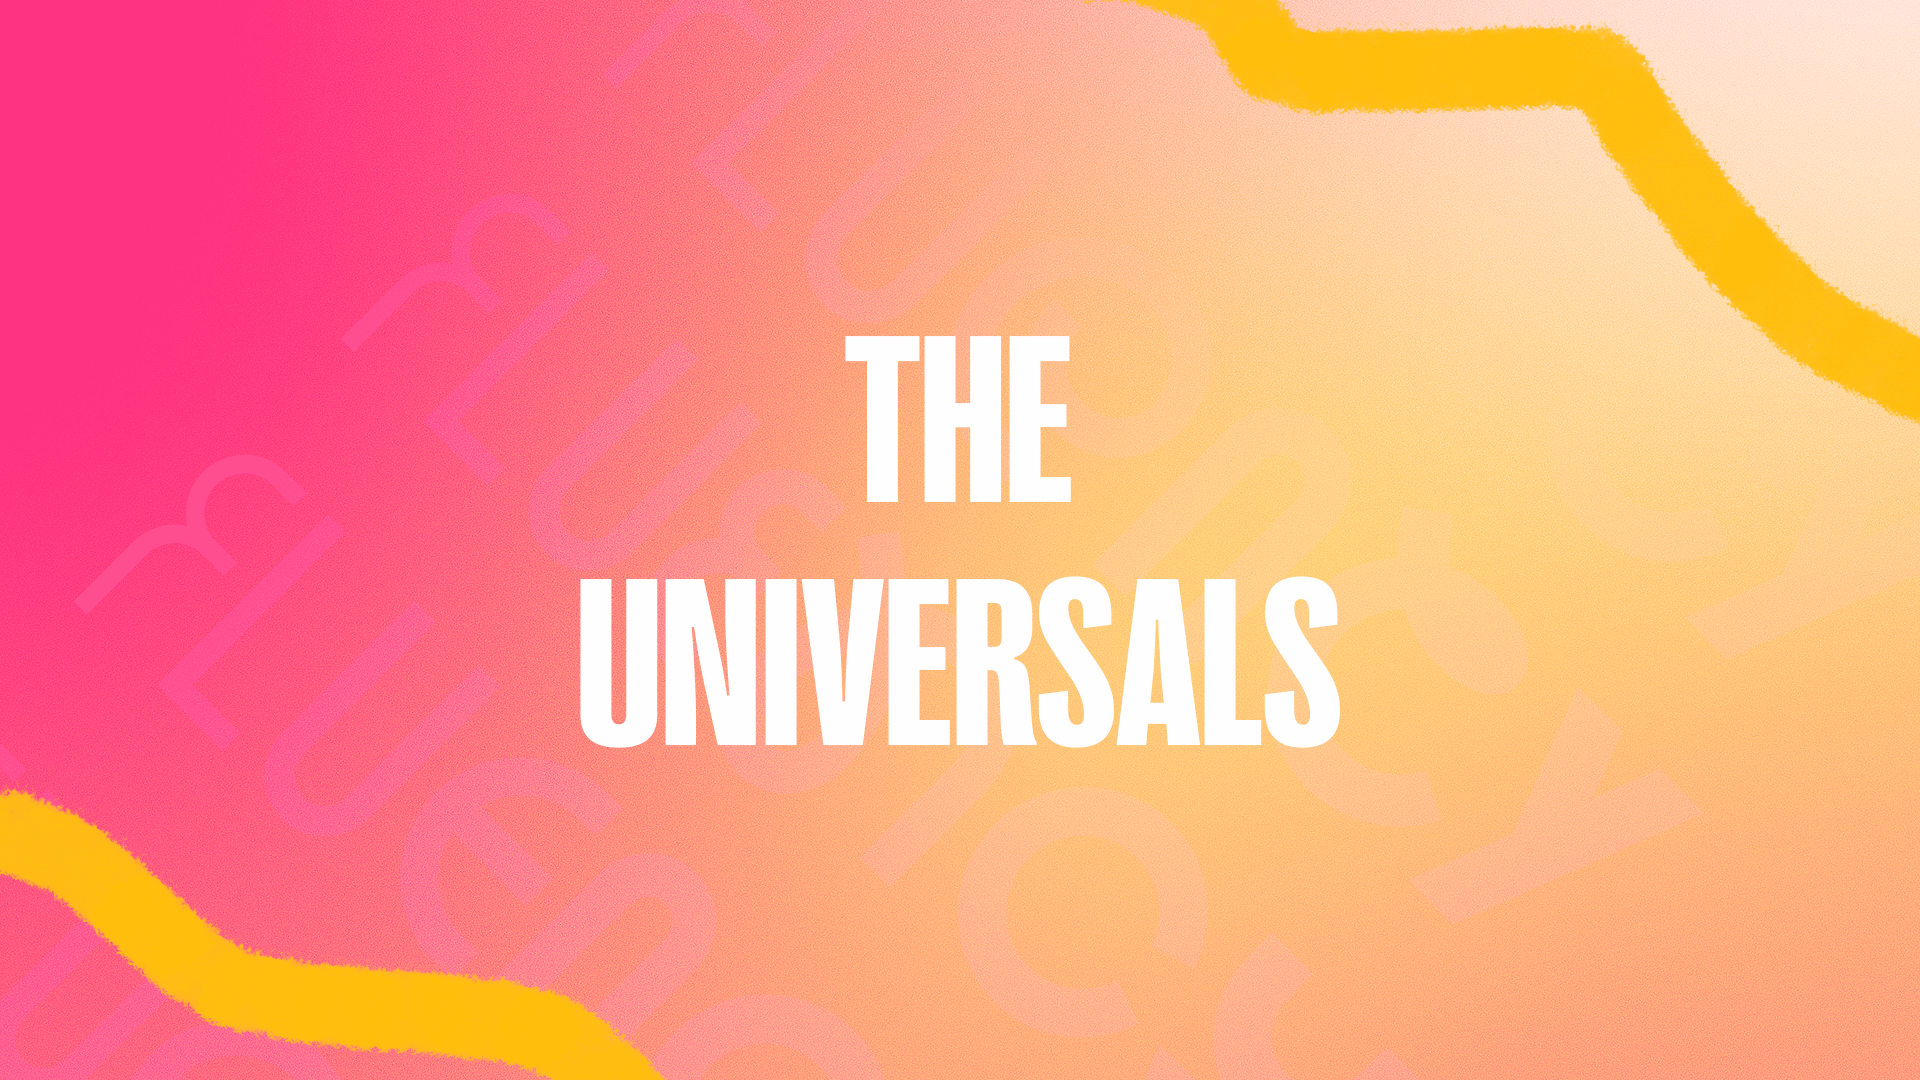 The universals